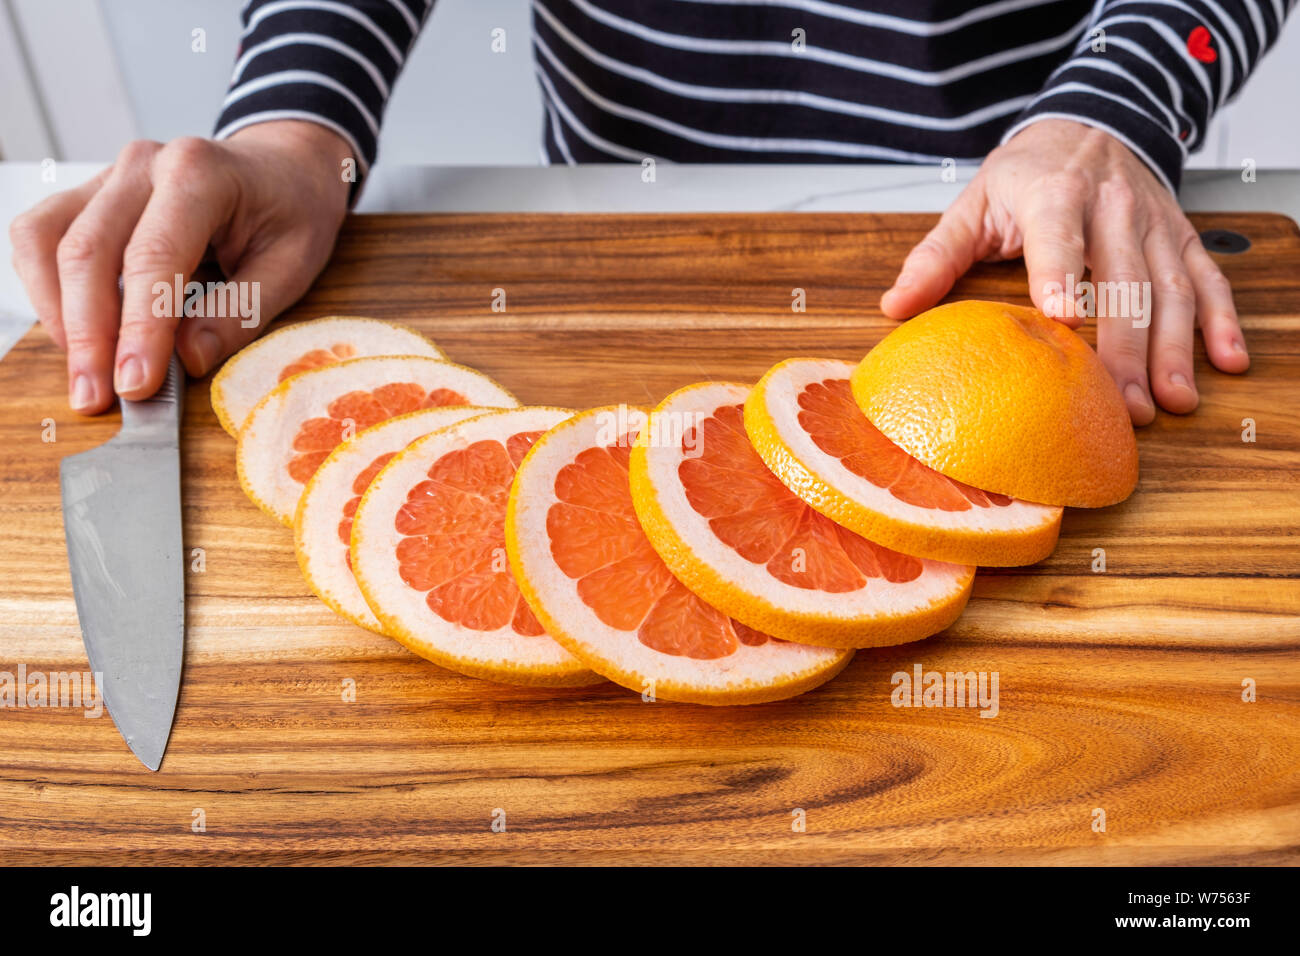 https://c8.alamy.com/comp/W7563F/caucasian-woman-hands-placed-on-wooden-chopping-board-with-sliced-red-grapefruit-and-knife-W7563F.jpg